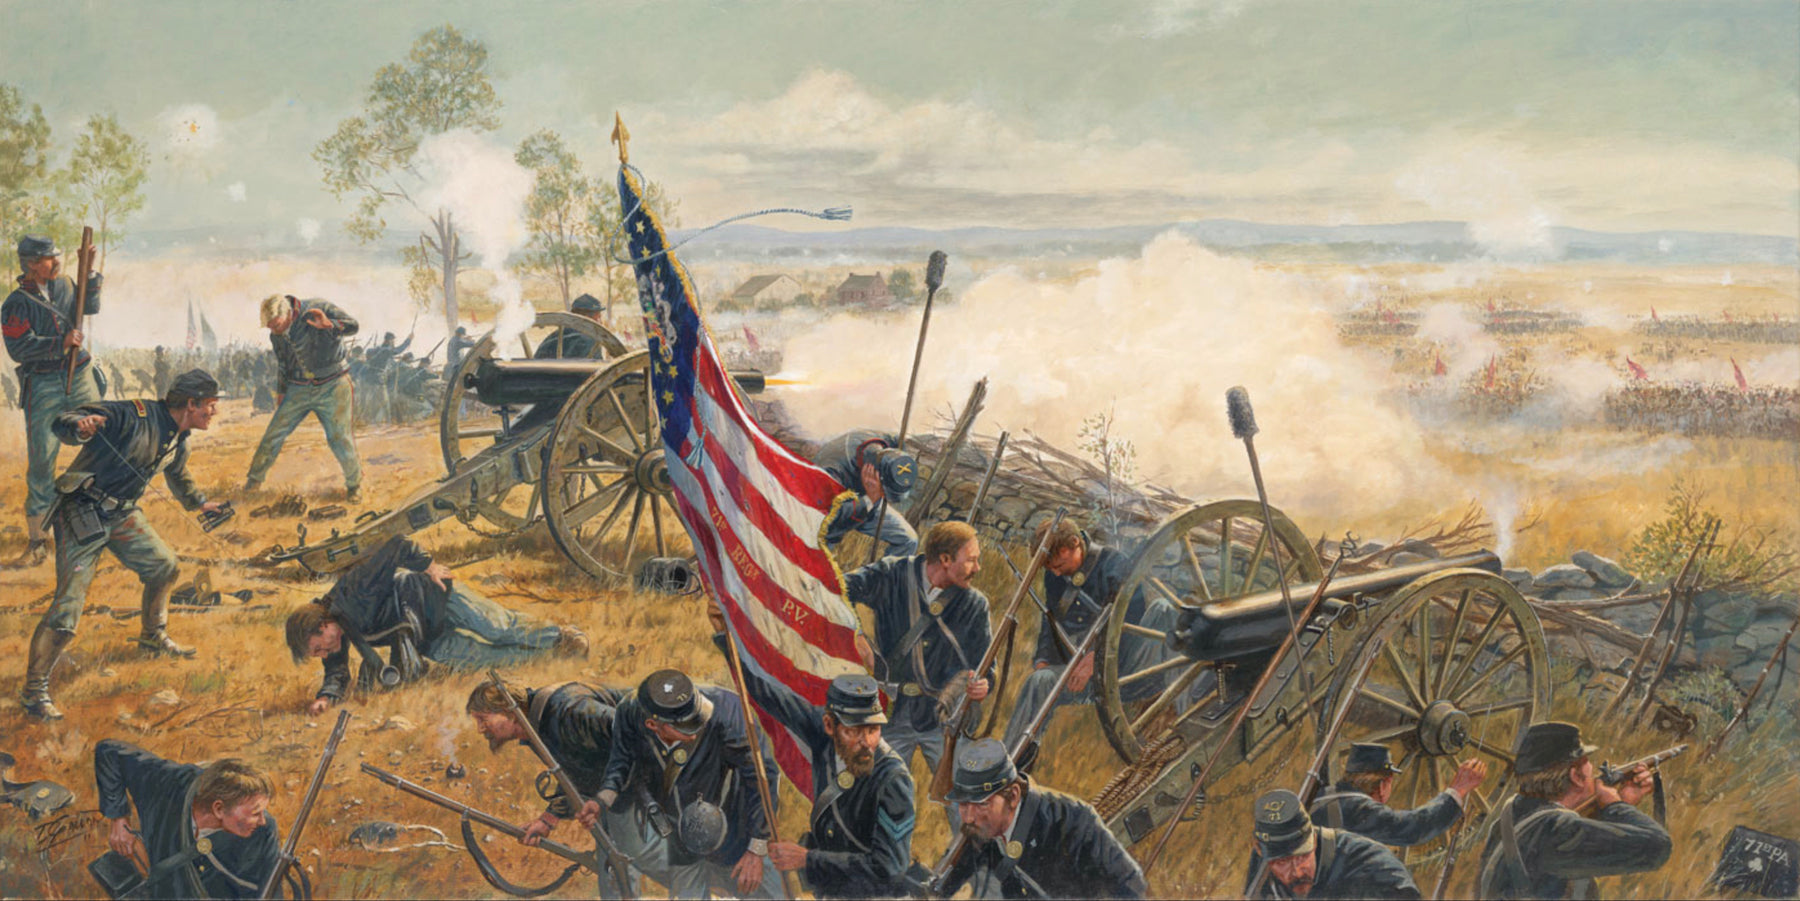 The Charge at Gettysburg - Paiting depicting the charge